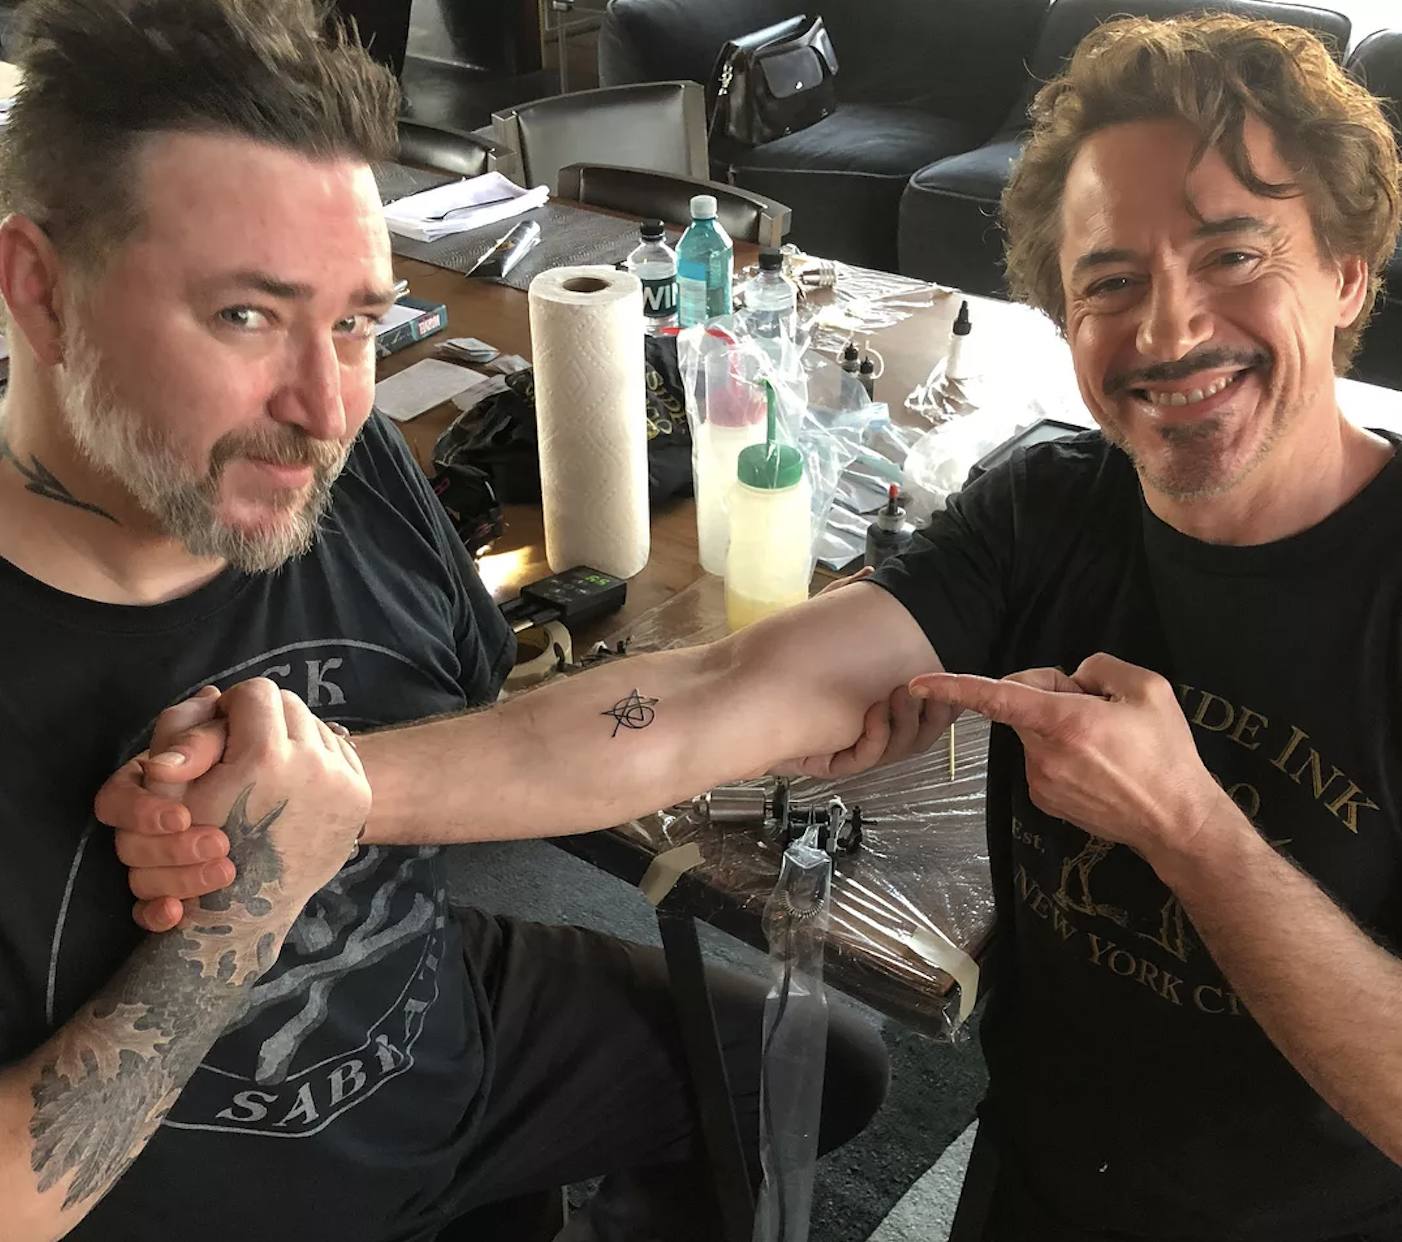 19 Actors Who Got Tattoos To Honor A Movie Or TV Role